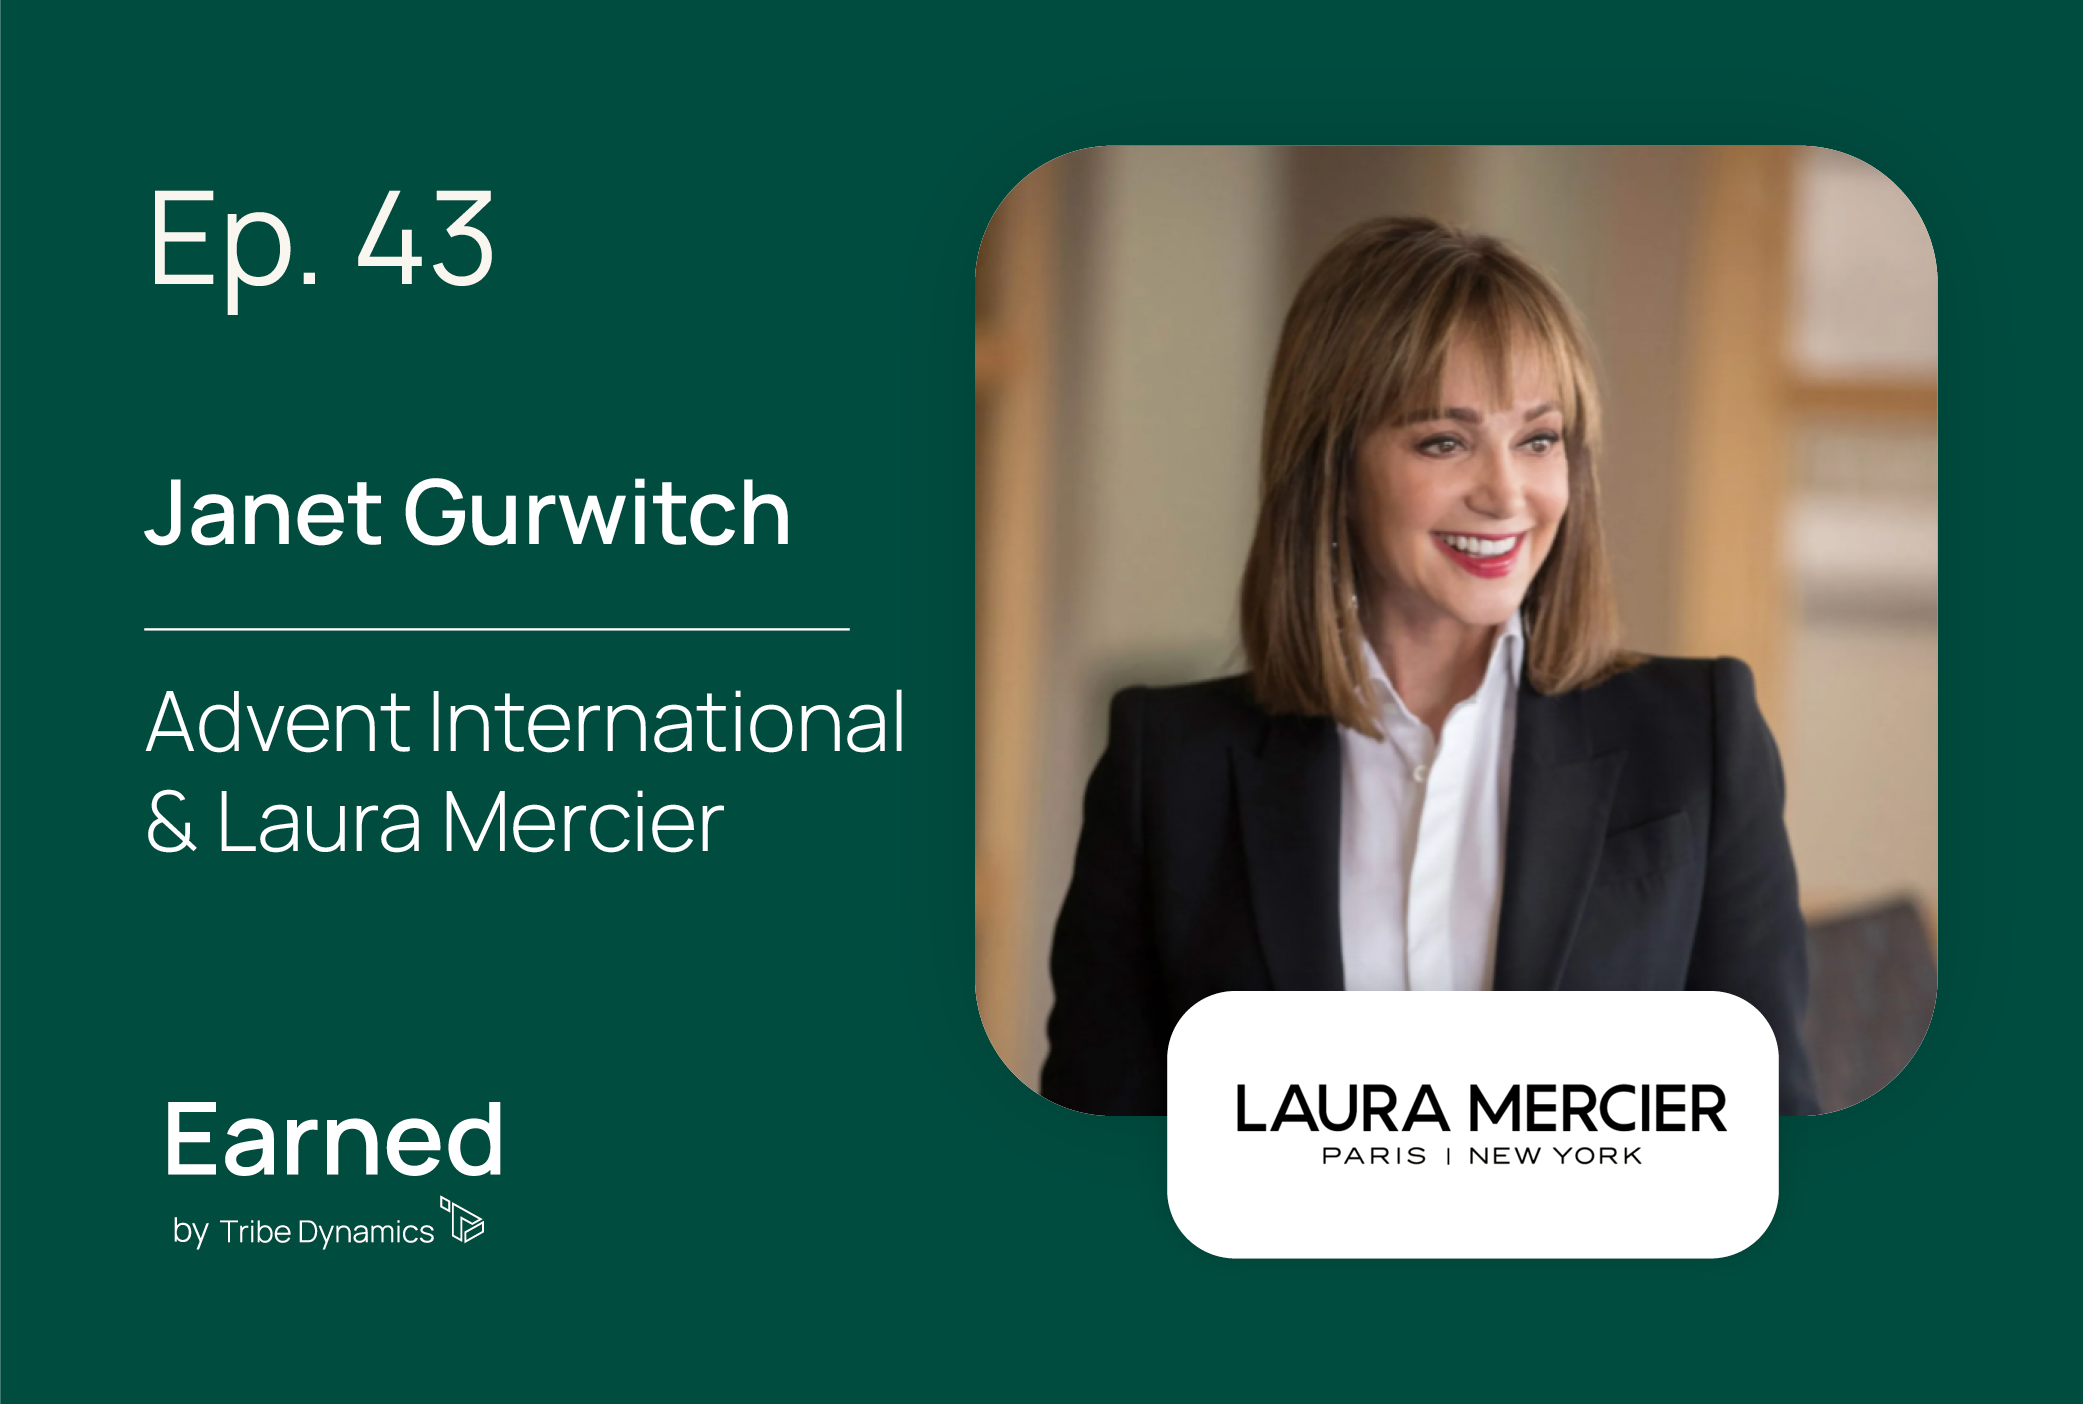 Earned Ep. 43: Janet Gurwitch’s Playbook for Growing Brands to $100M in Revenue